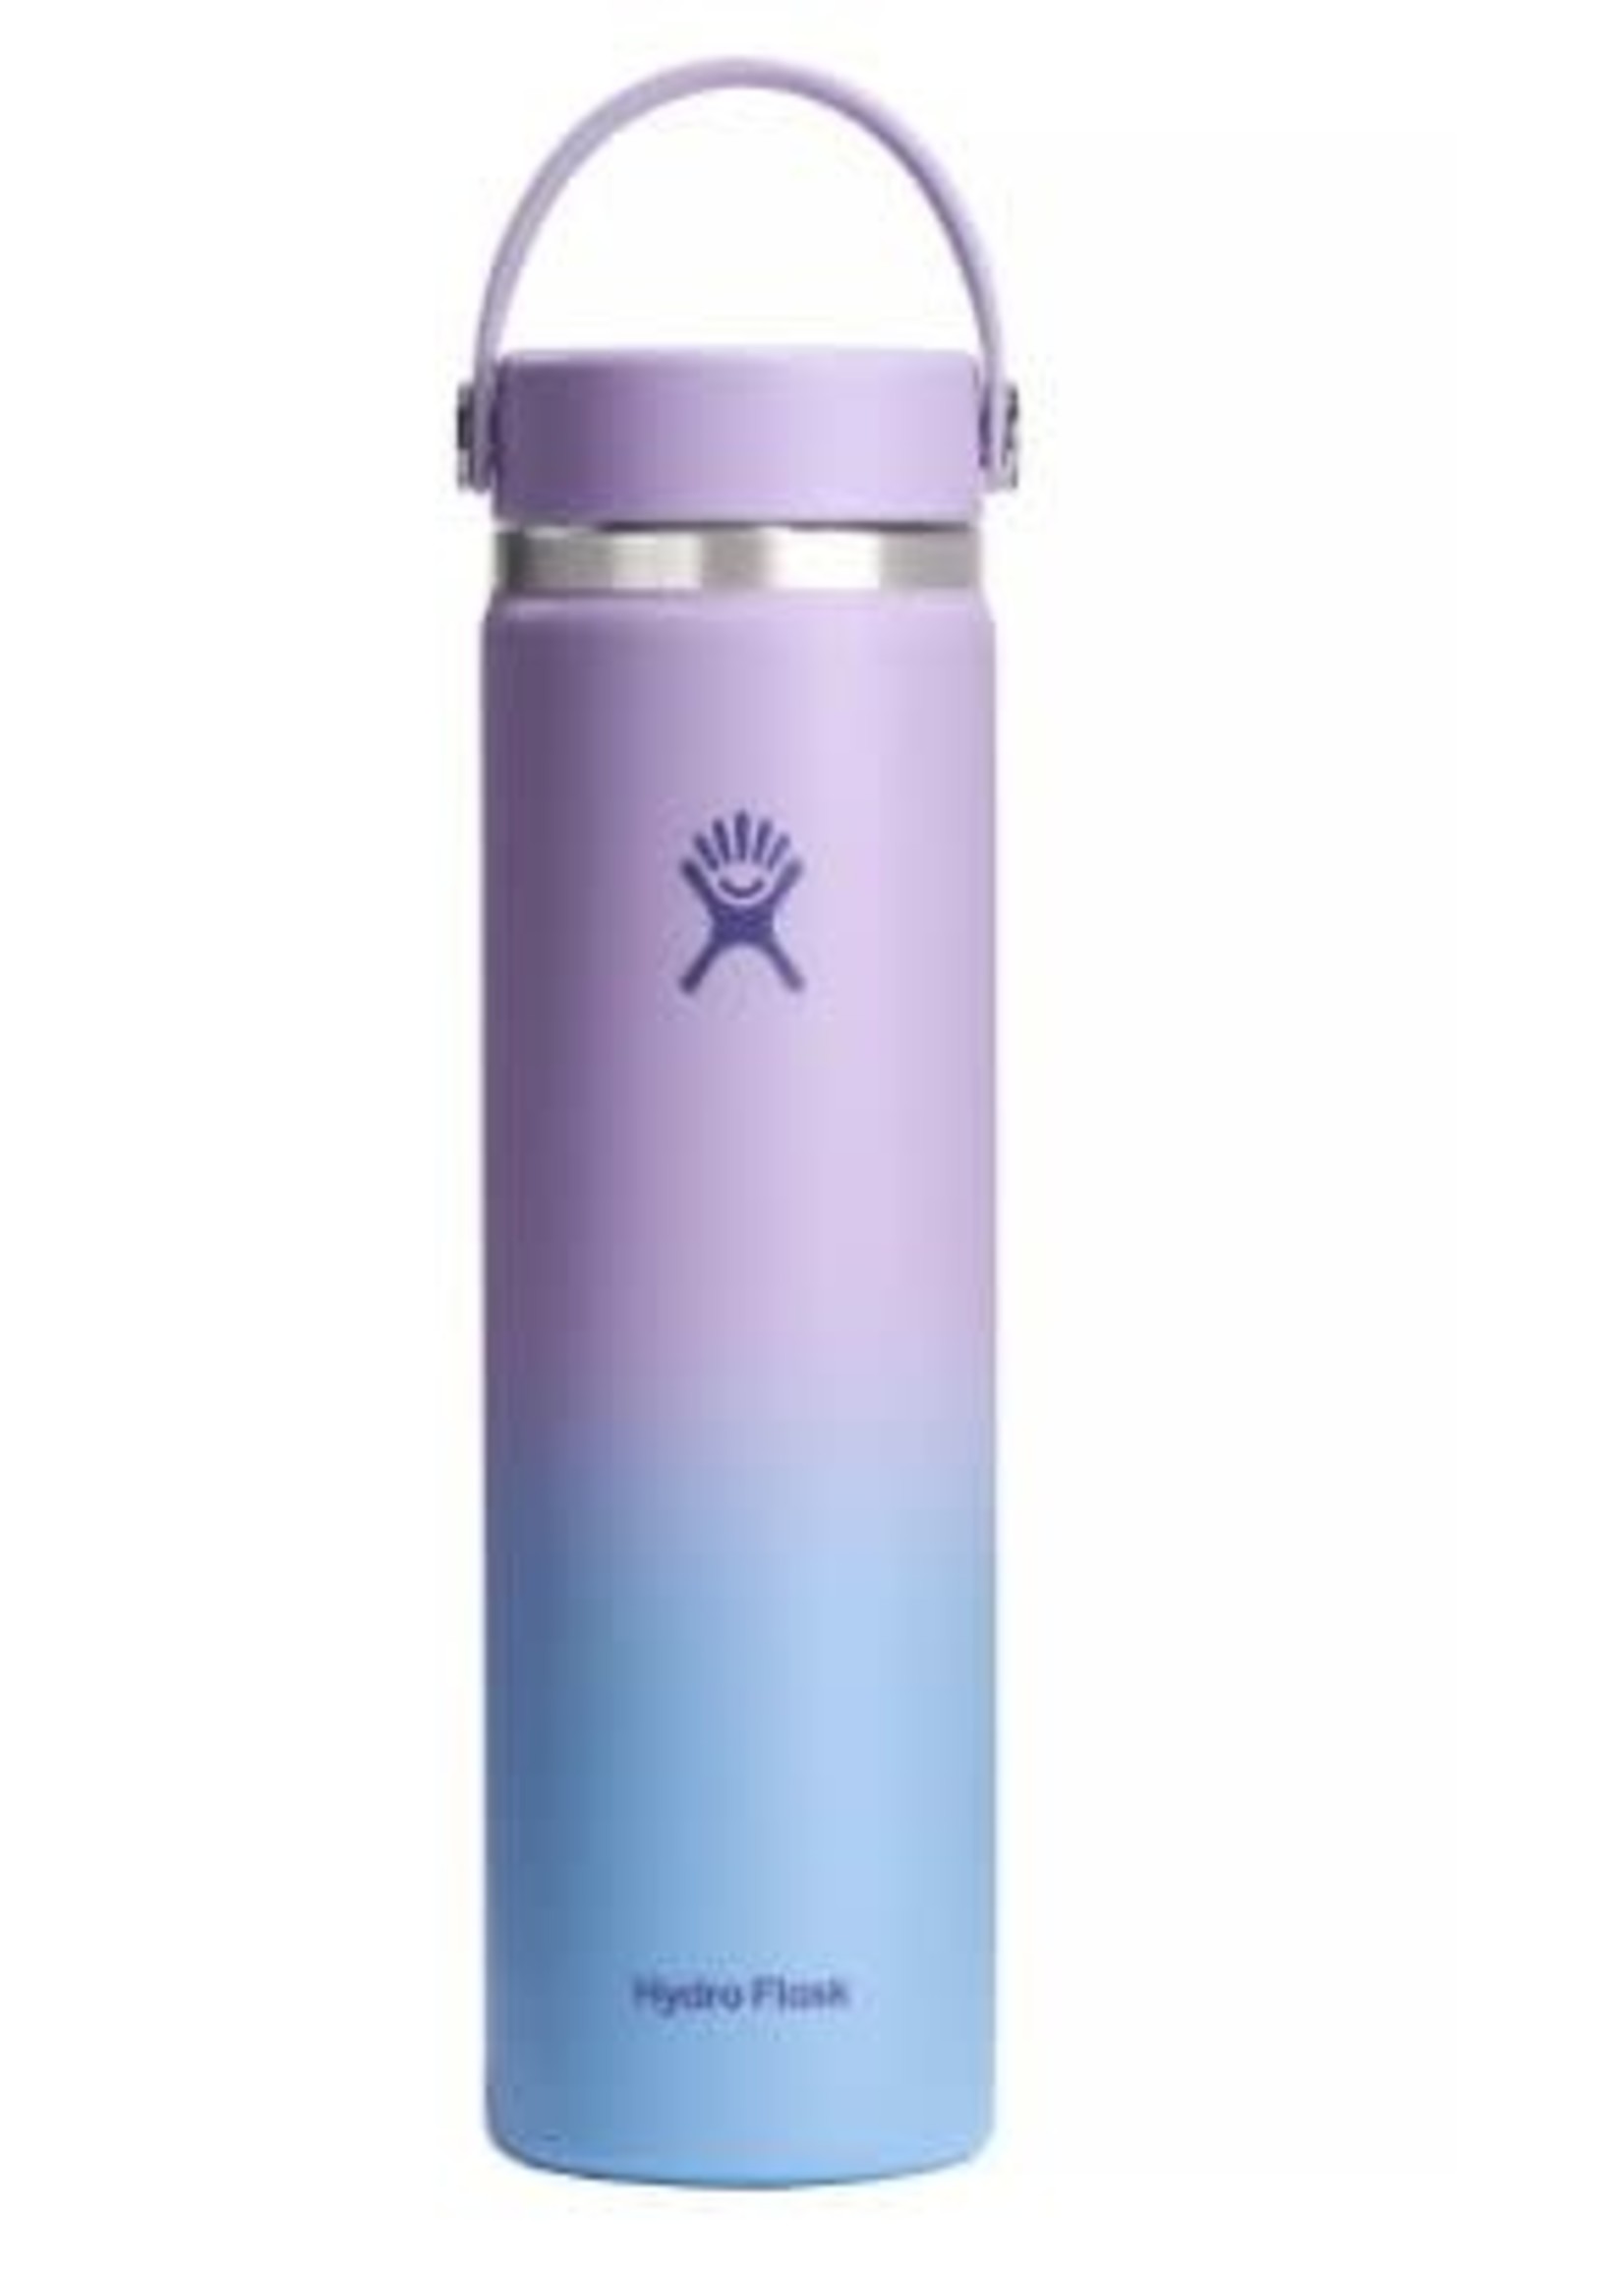 Hydro Flask Fog 32oz Wide Mouth Stainless Steel Water Bottle Light Purple  Lilac